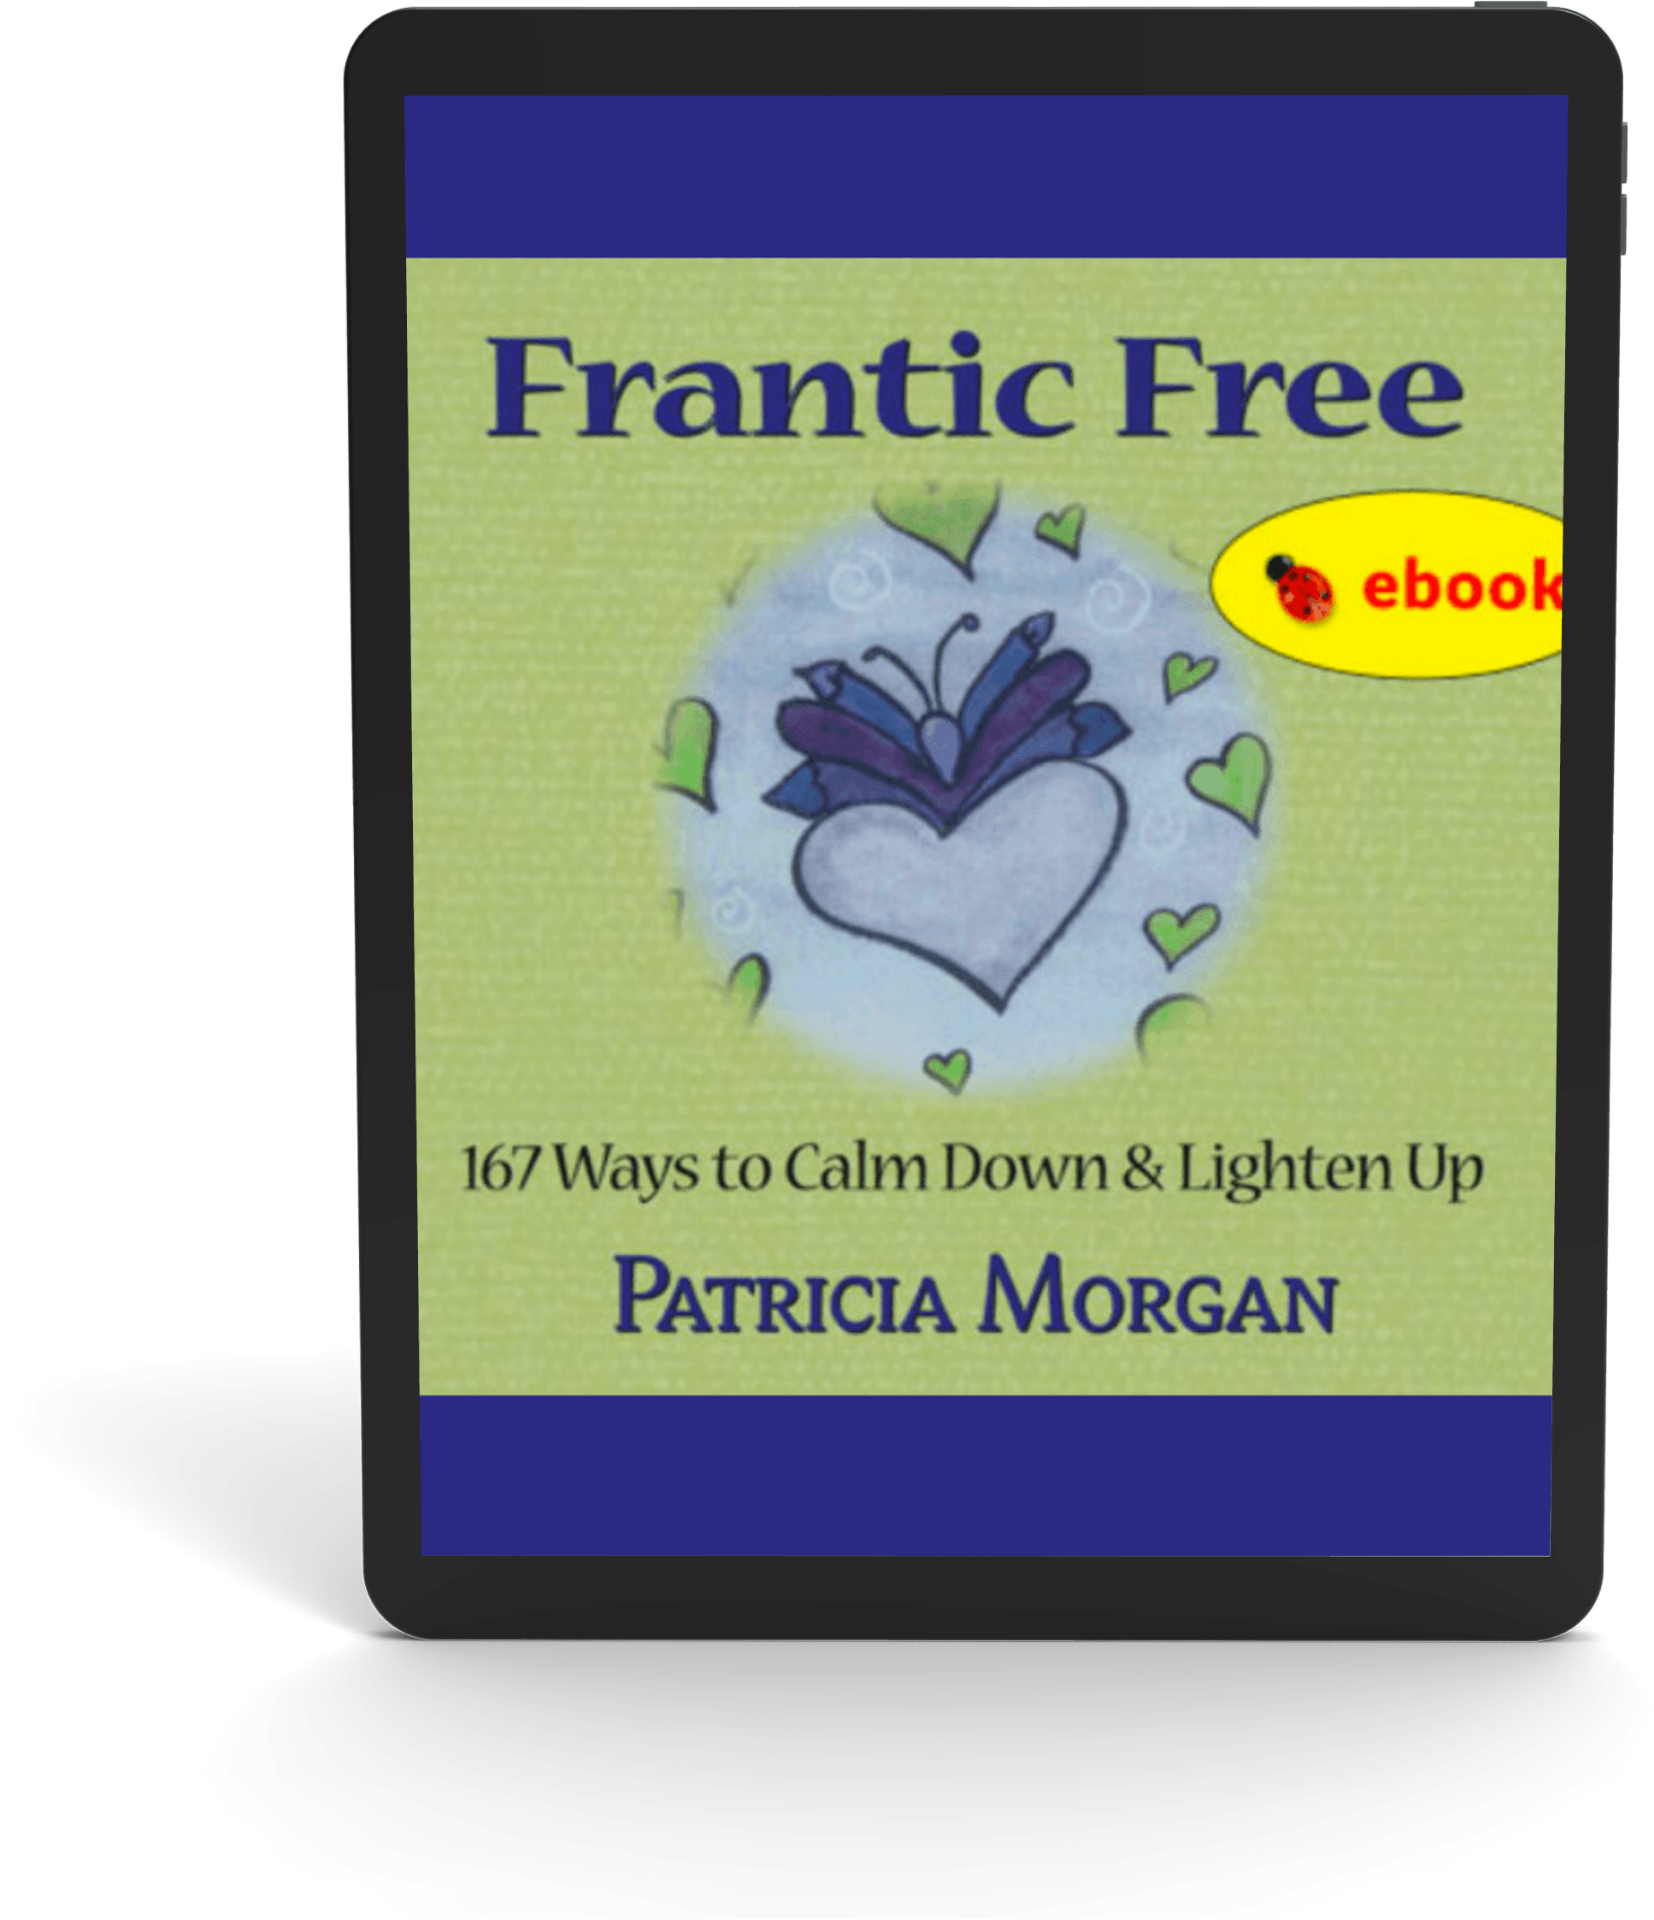 Mini-book: Frantic Free - 167 Ways to Calm Down and Lighten Up (ebook)